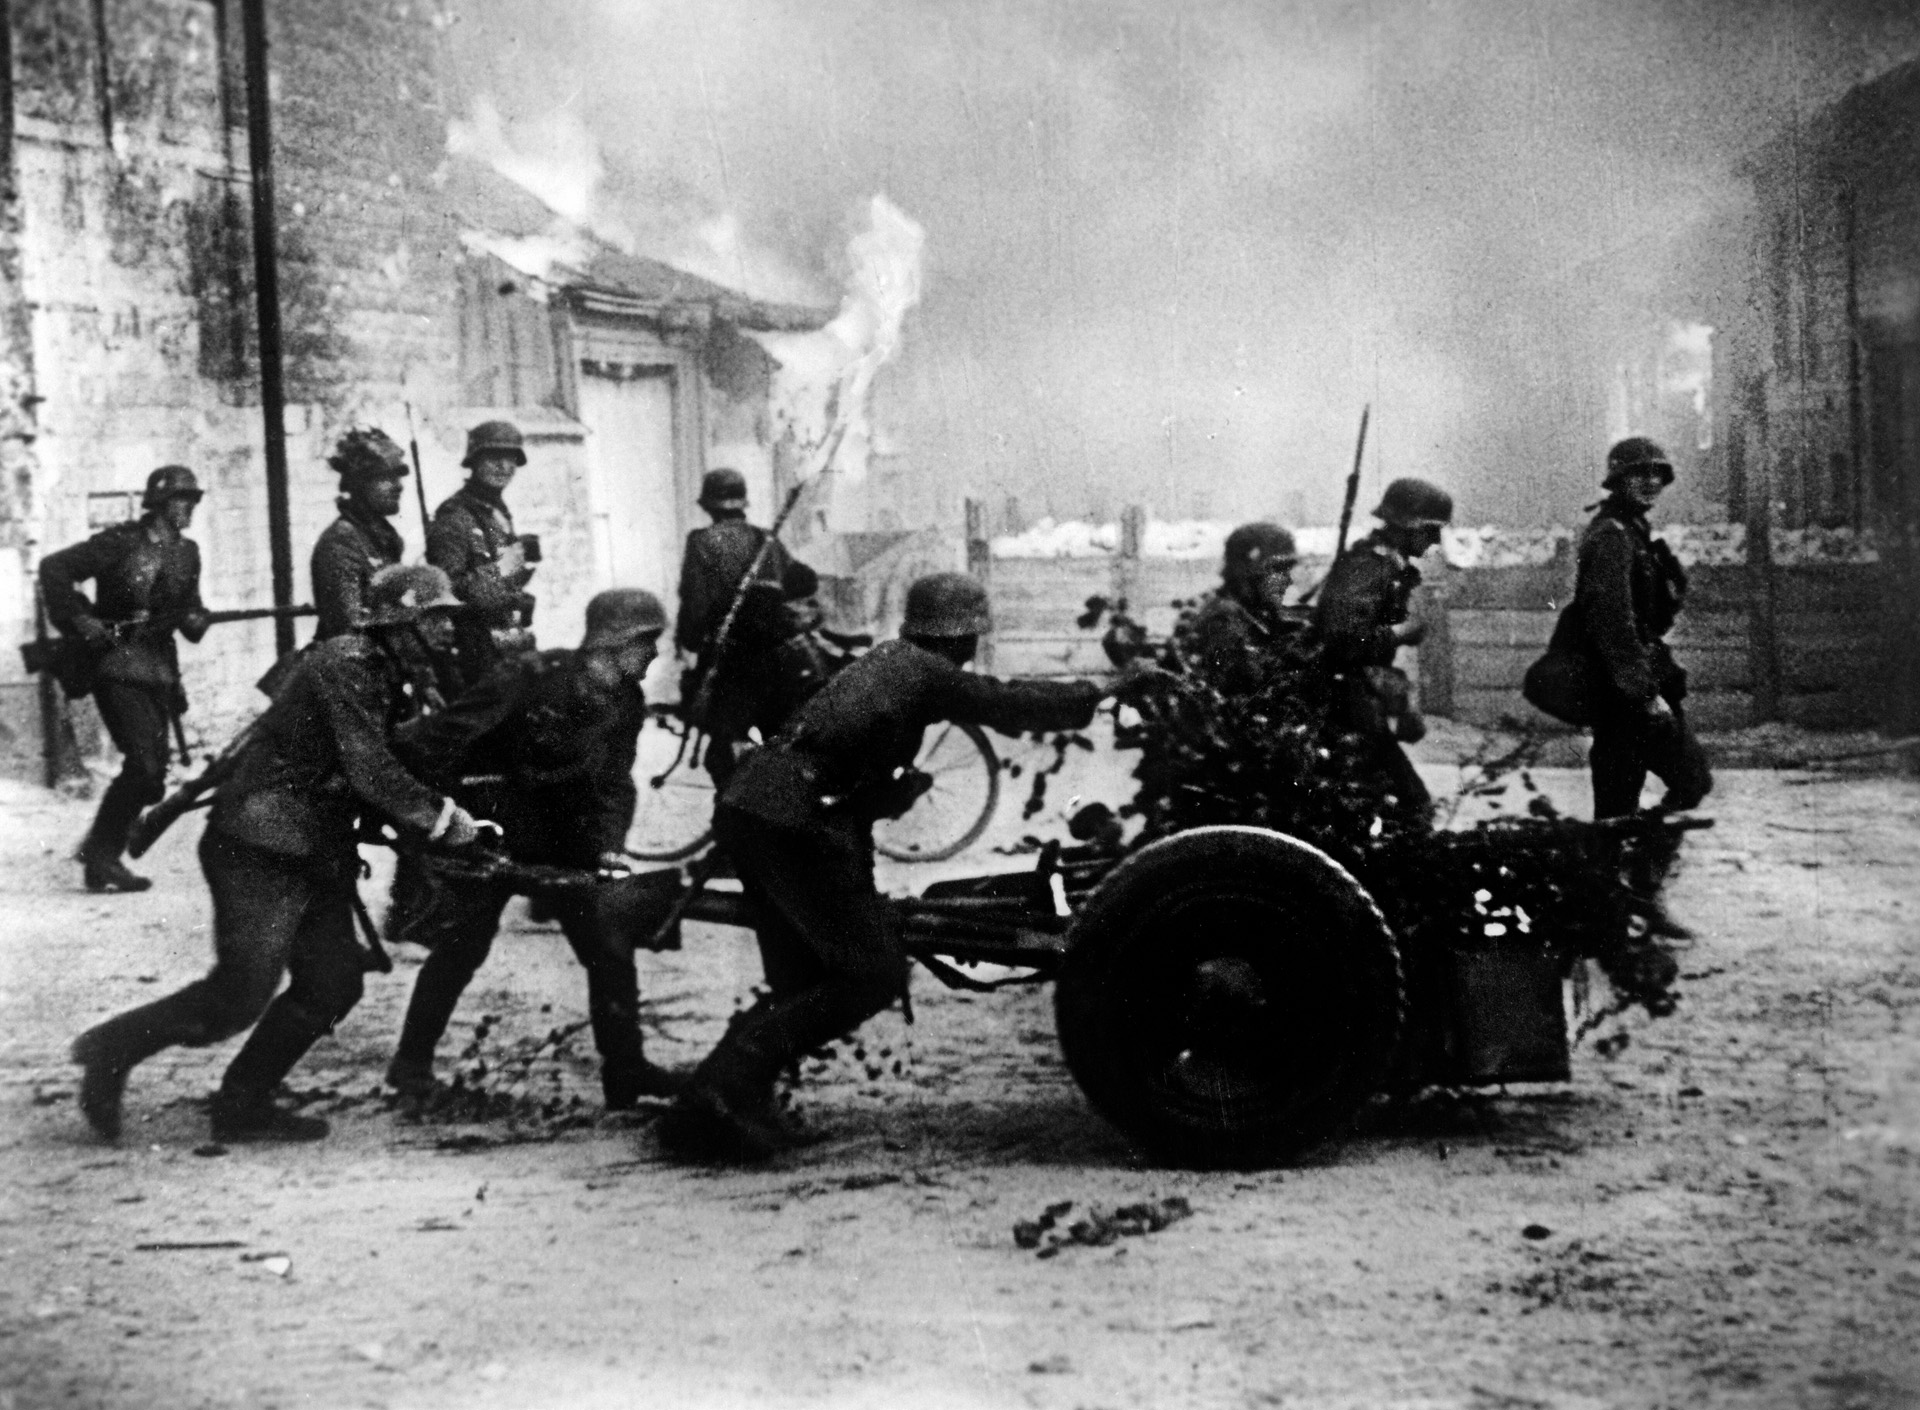 Pressing the perimeter of the Dunkirk defenses, German soldiers manhandle a 37mm PAK 36 gun into firing position. Adolf Hitler halted the ground campaign to allow the Luftwaffe to deliver the final blow at Dunkirk.